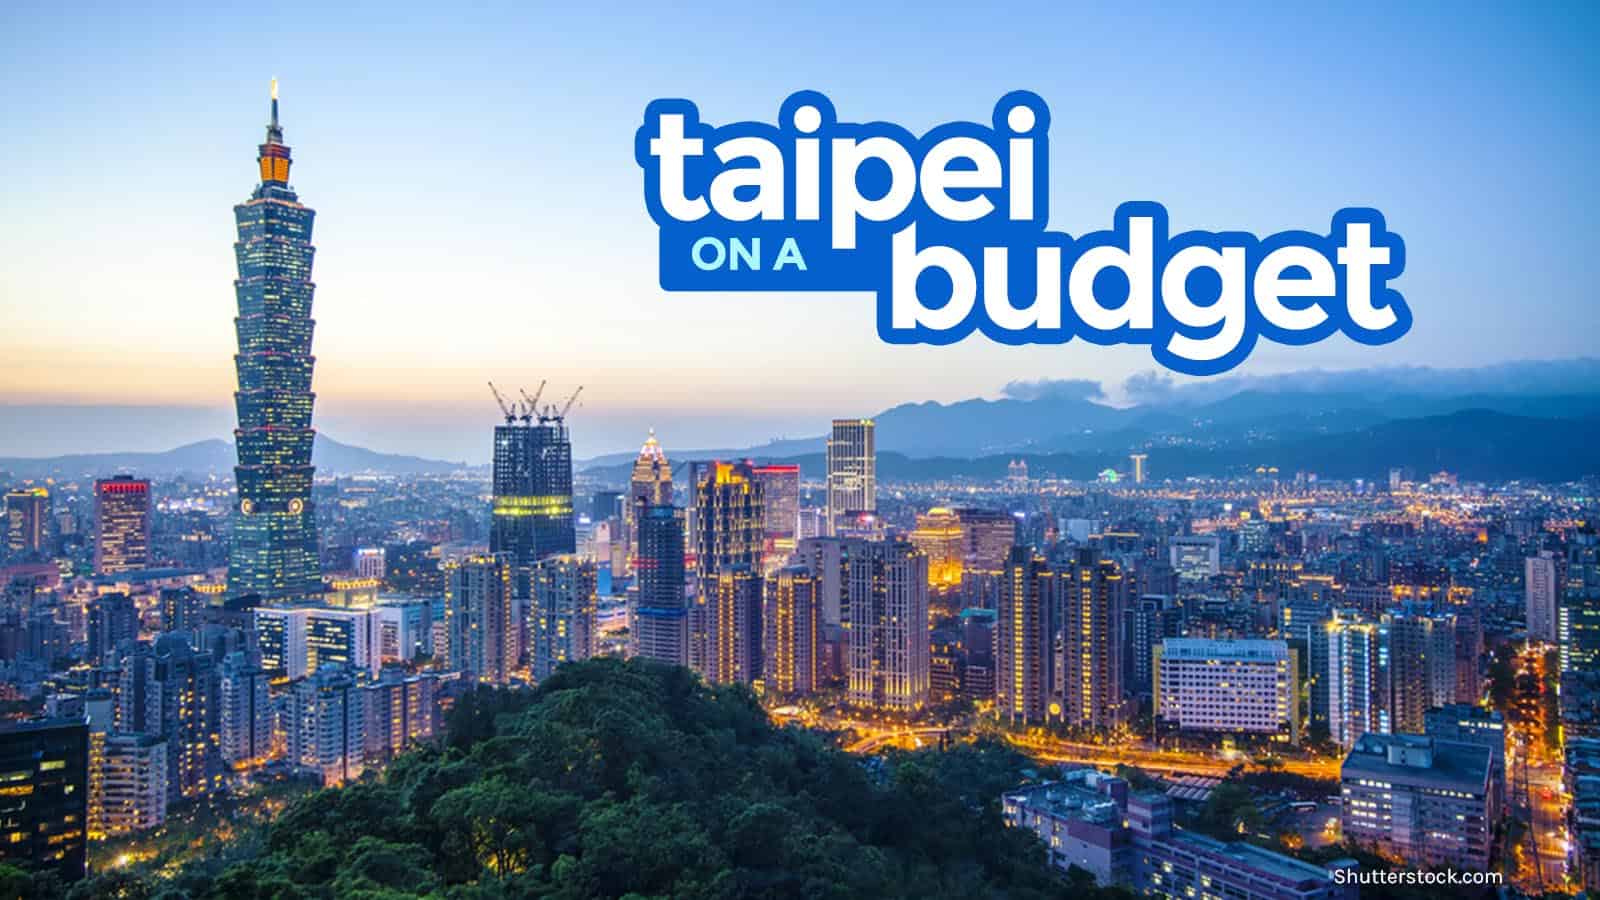 TAIPEI TAIWAN TRAVEL GUIDE with Budget Itinerary